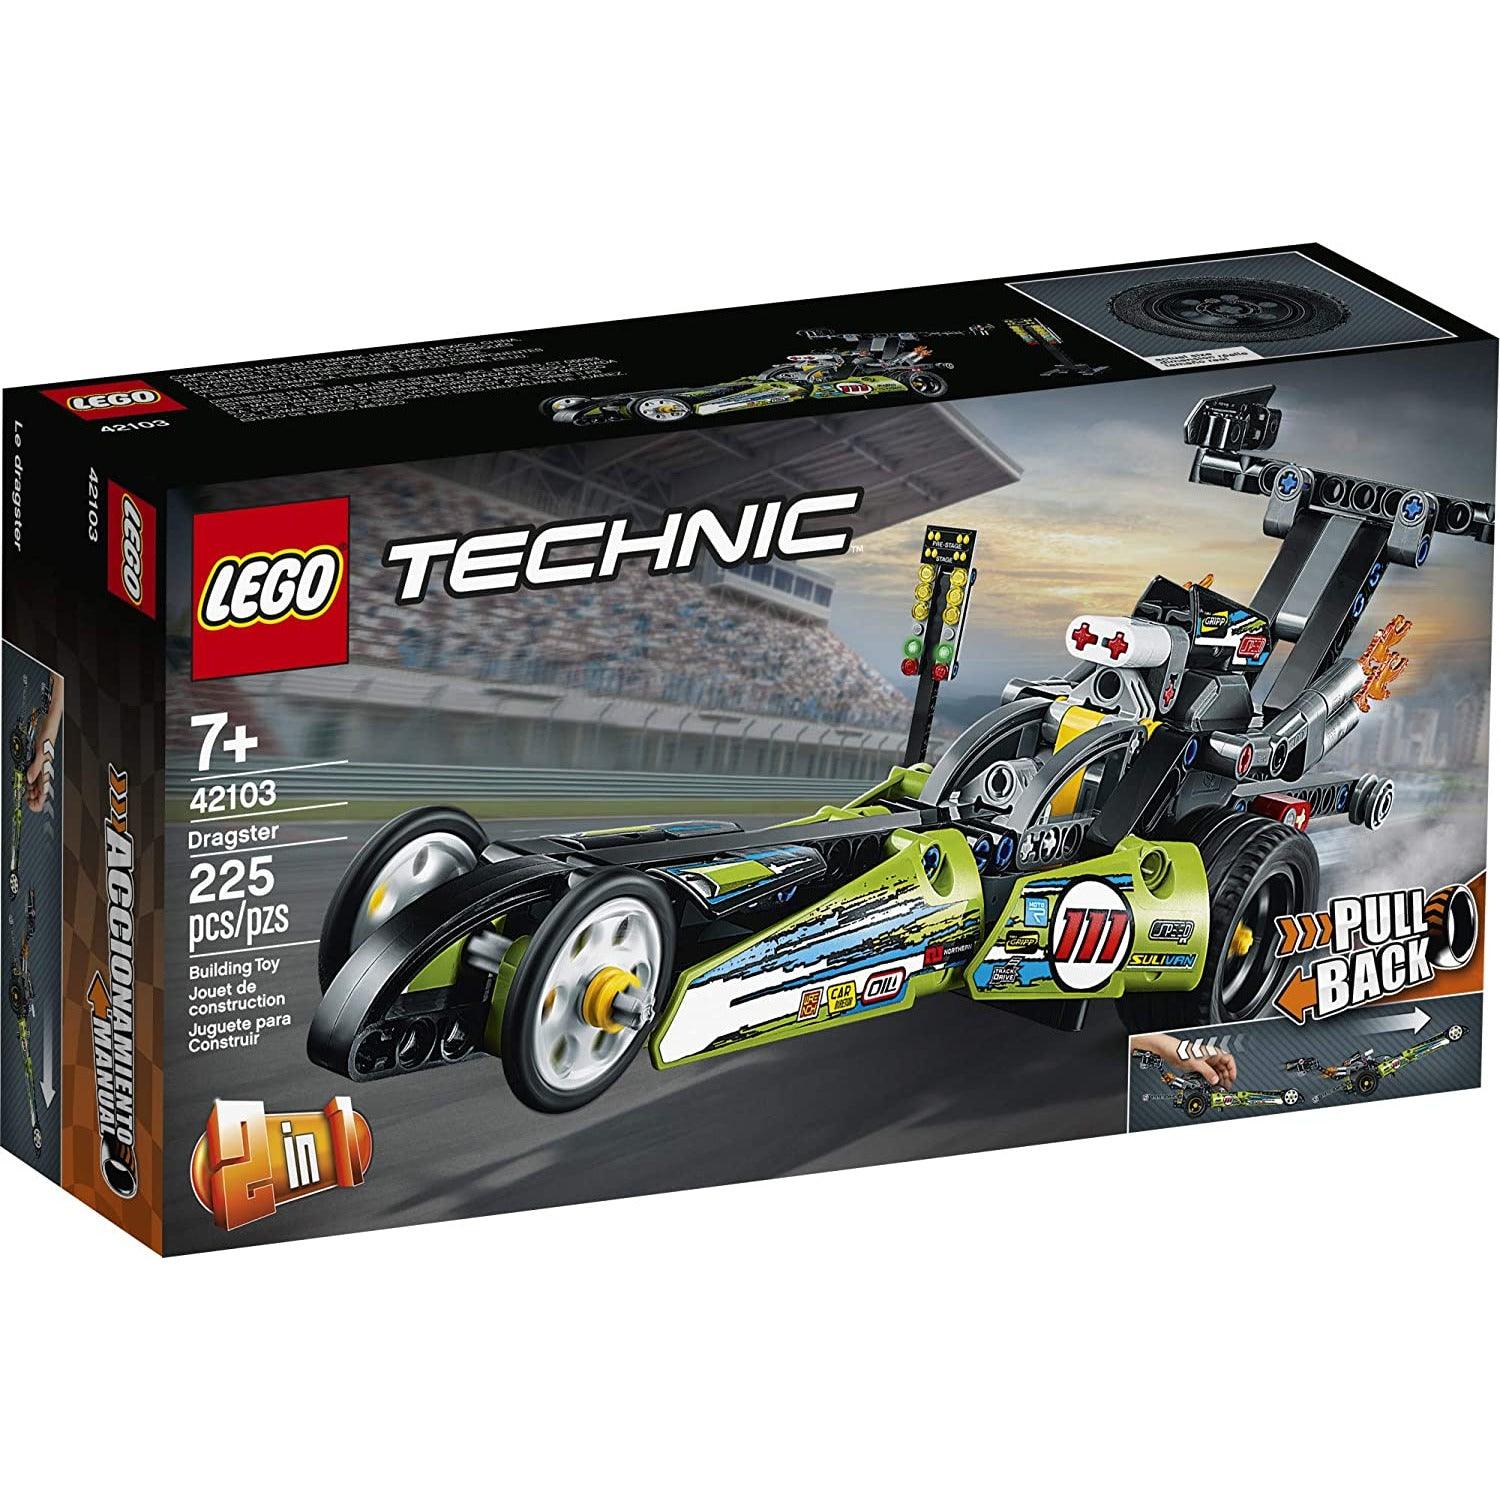 LEGO Technic Dragster 42103 Pull-Back Racing Toy Building Kit (225 Pieces) - BumbleToys - 18+, 5-7 Years, Boys, LEGO, OXE, Technic